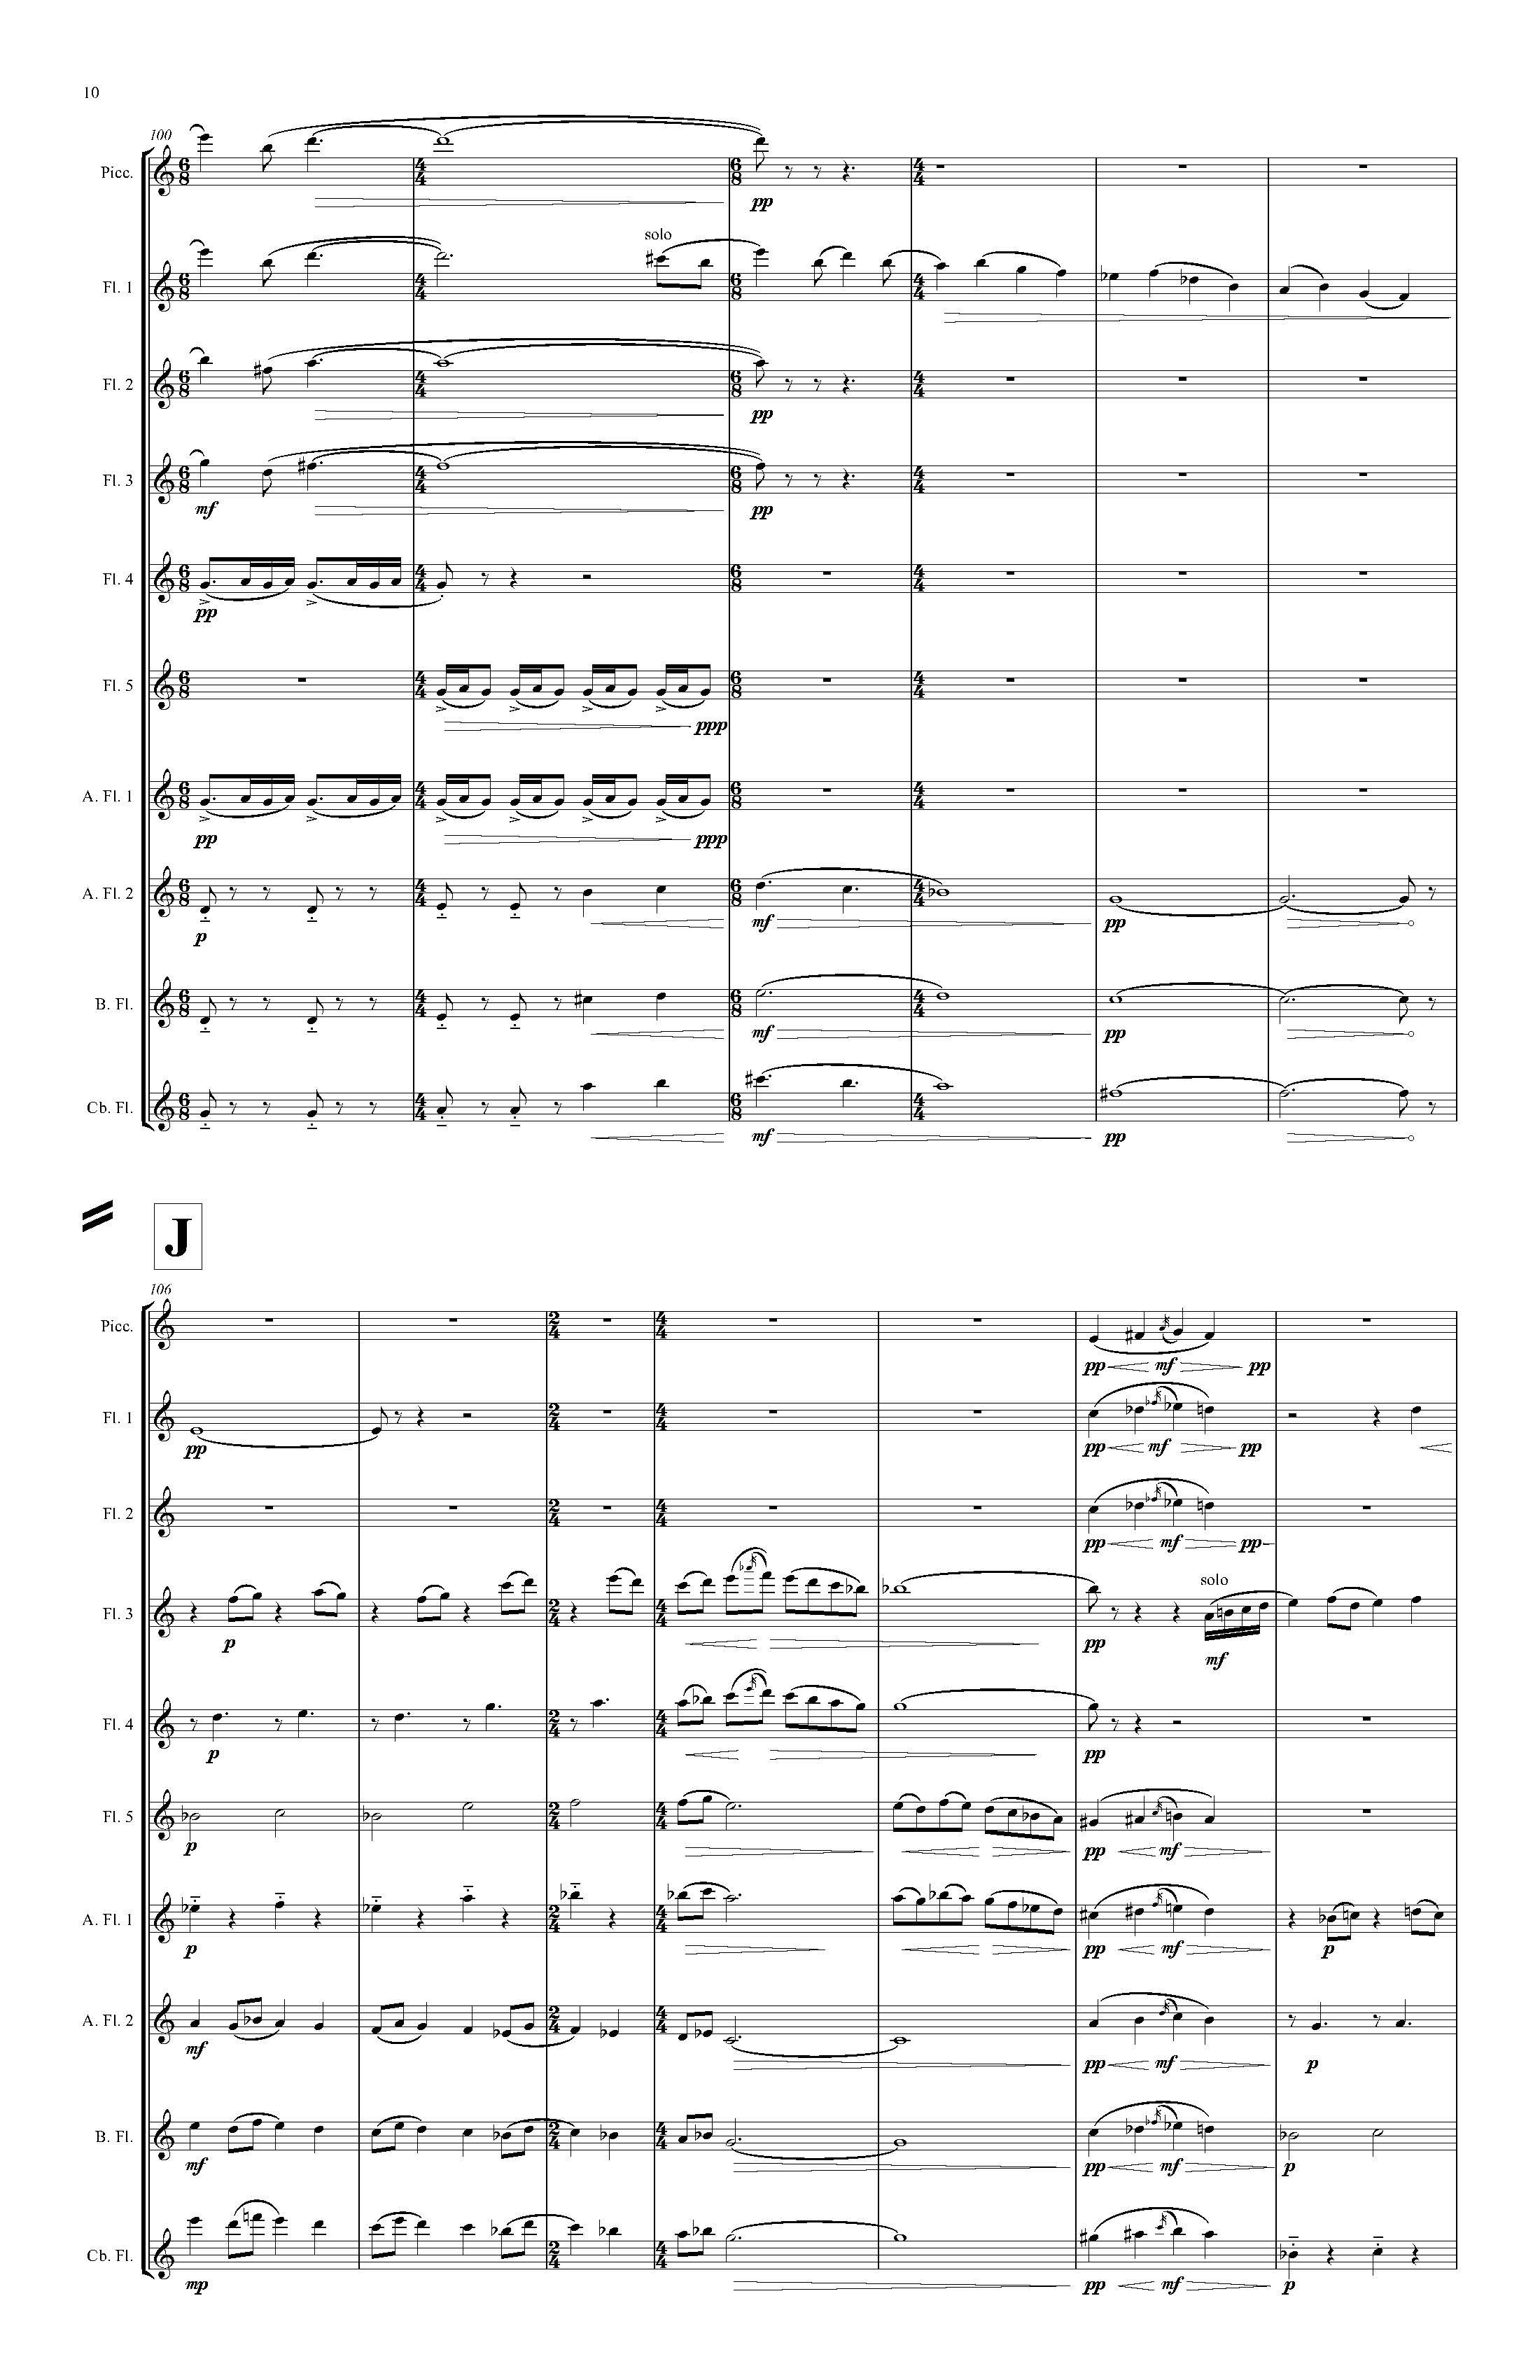 PIPES - Complete Score_Page_16.jpg